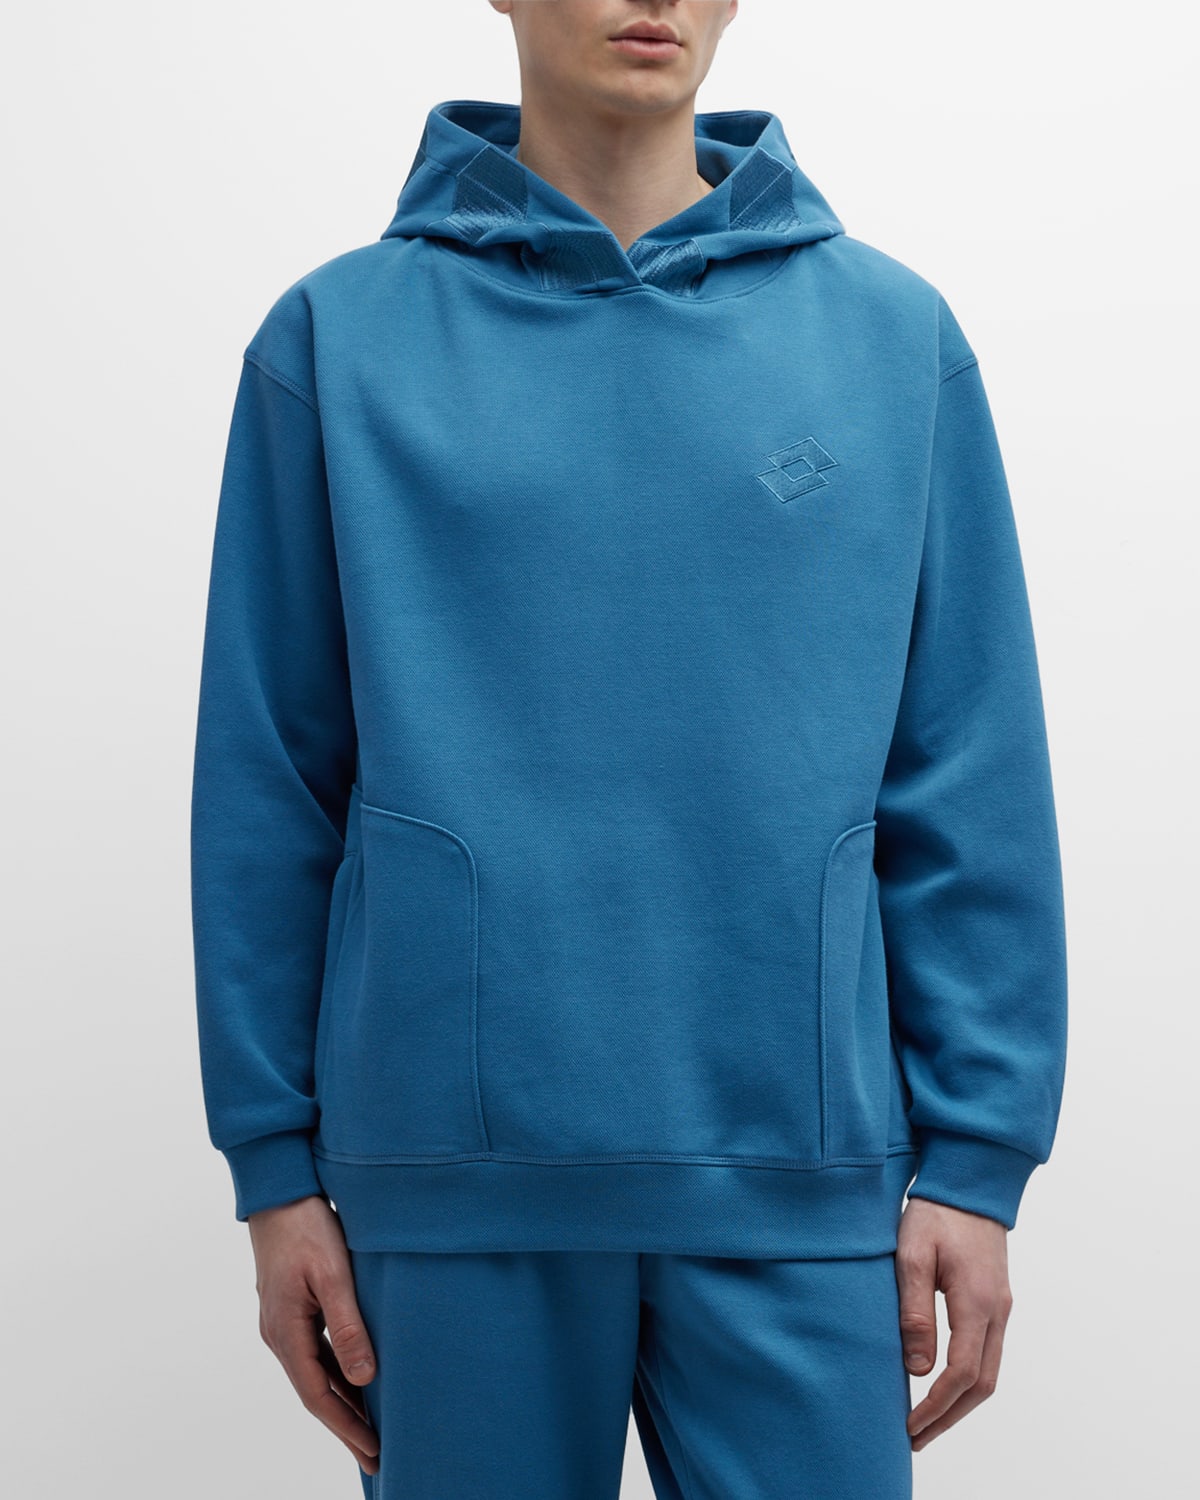 Lotto Italia Men's Tonal Soccer Embroidered Hoodie In Sterling Blue